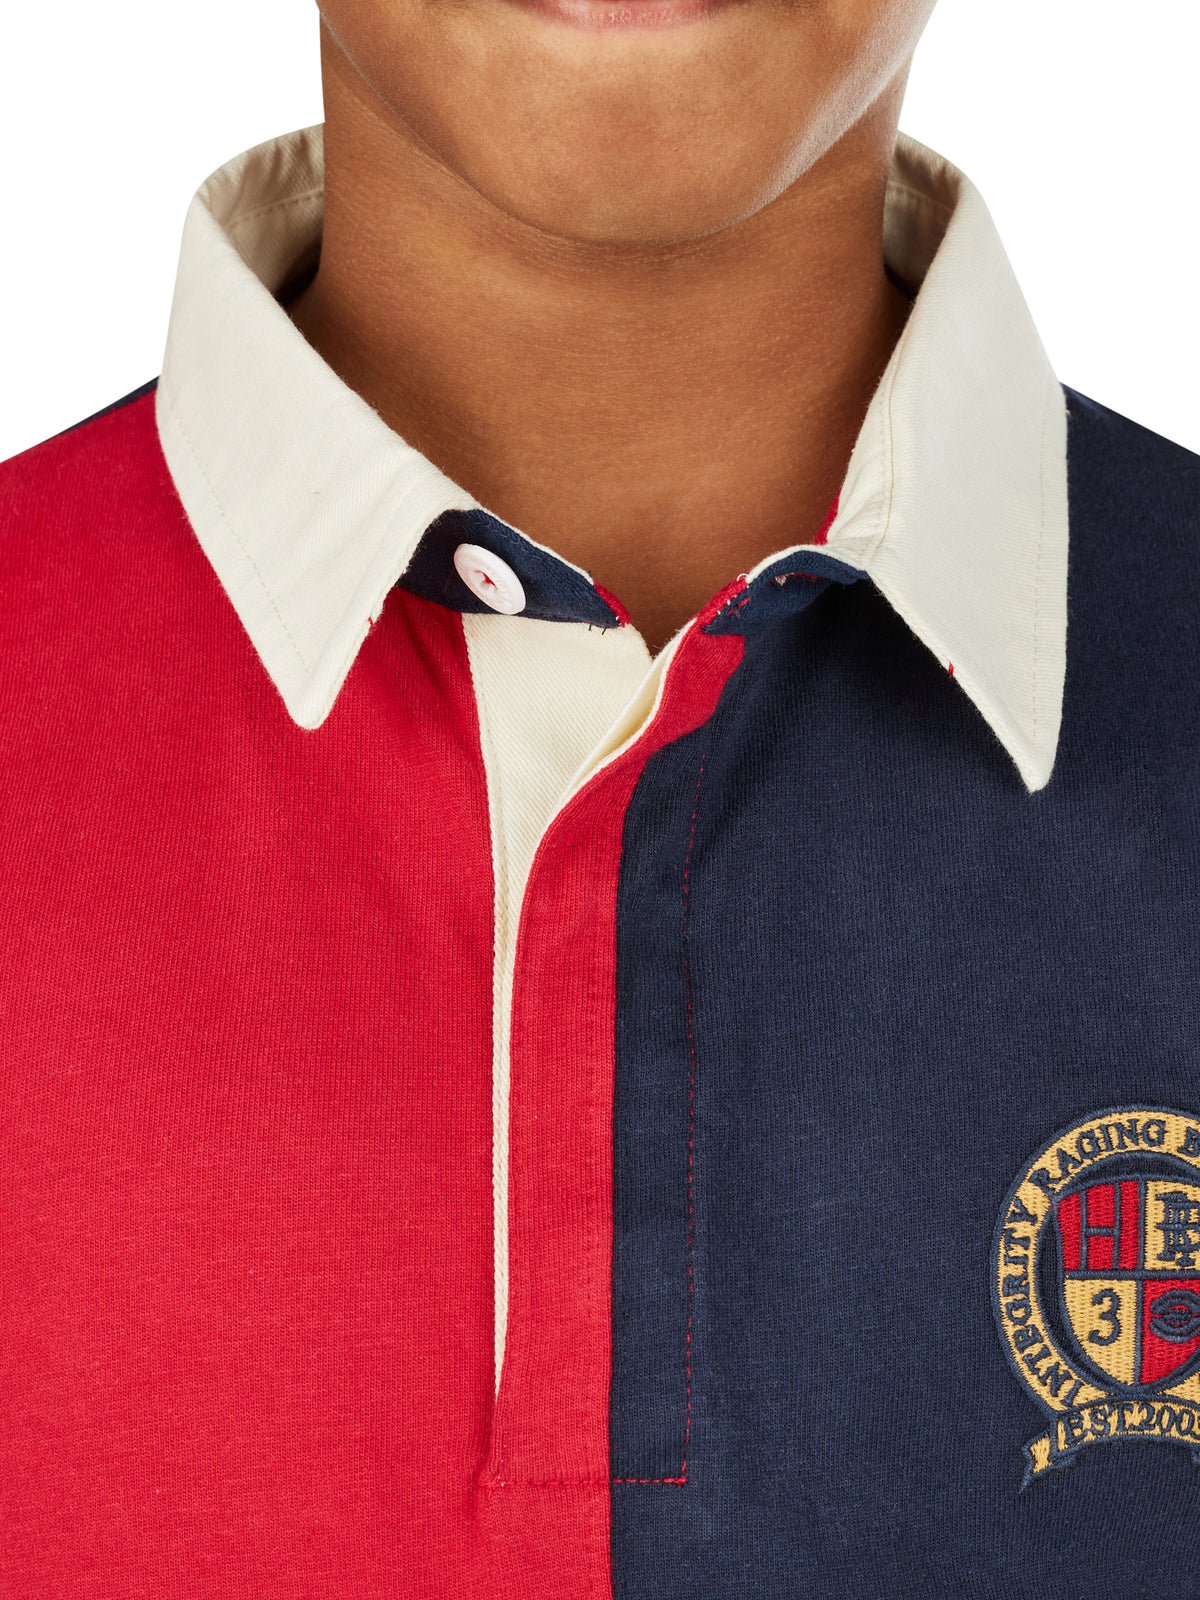 Short Sleeve Harlequin Embroidered Rugby - Red